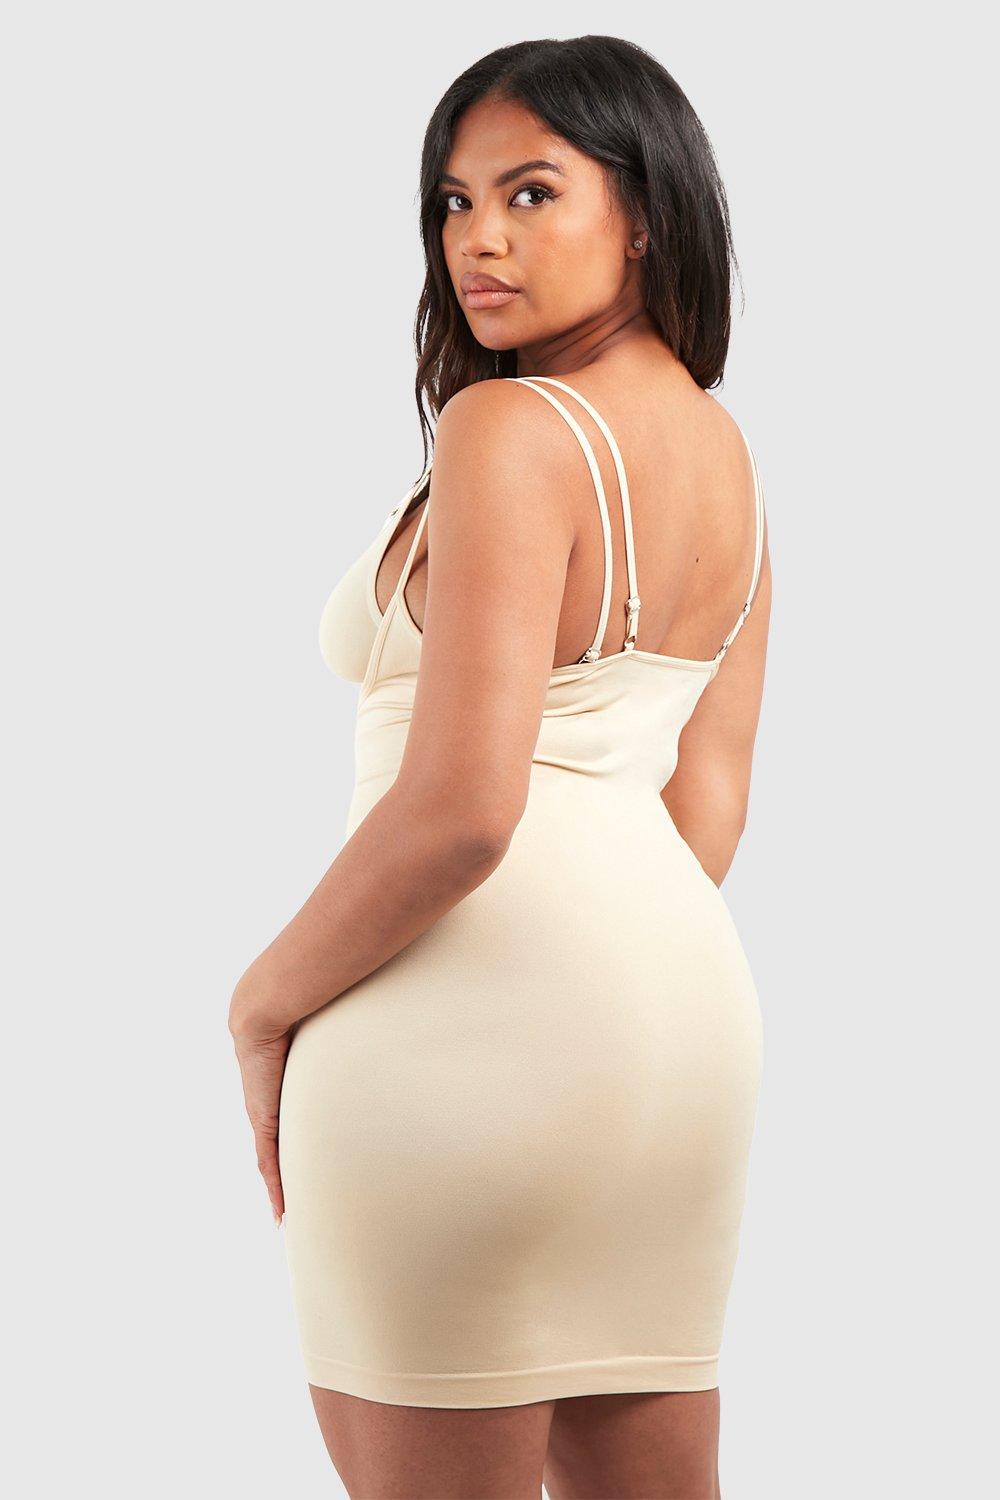 BEST DRESSES FOR BIG BOOBS Large Bust Style Tips*BooHoo Try-on